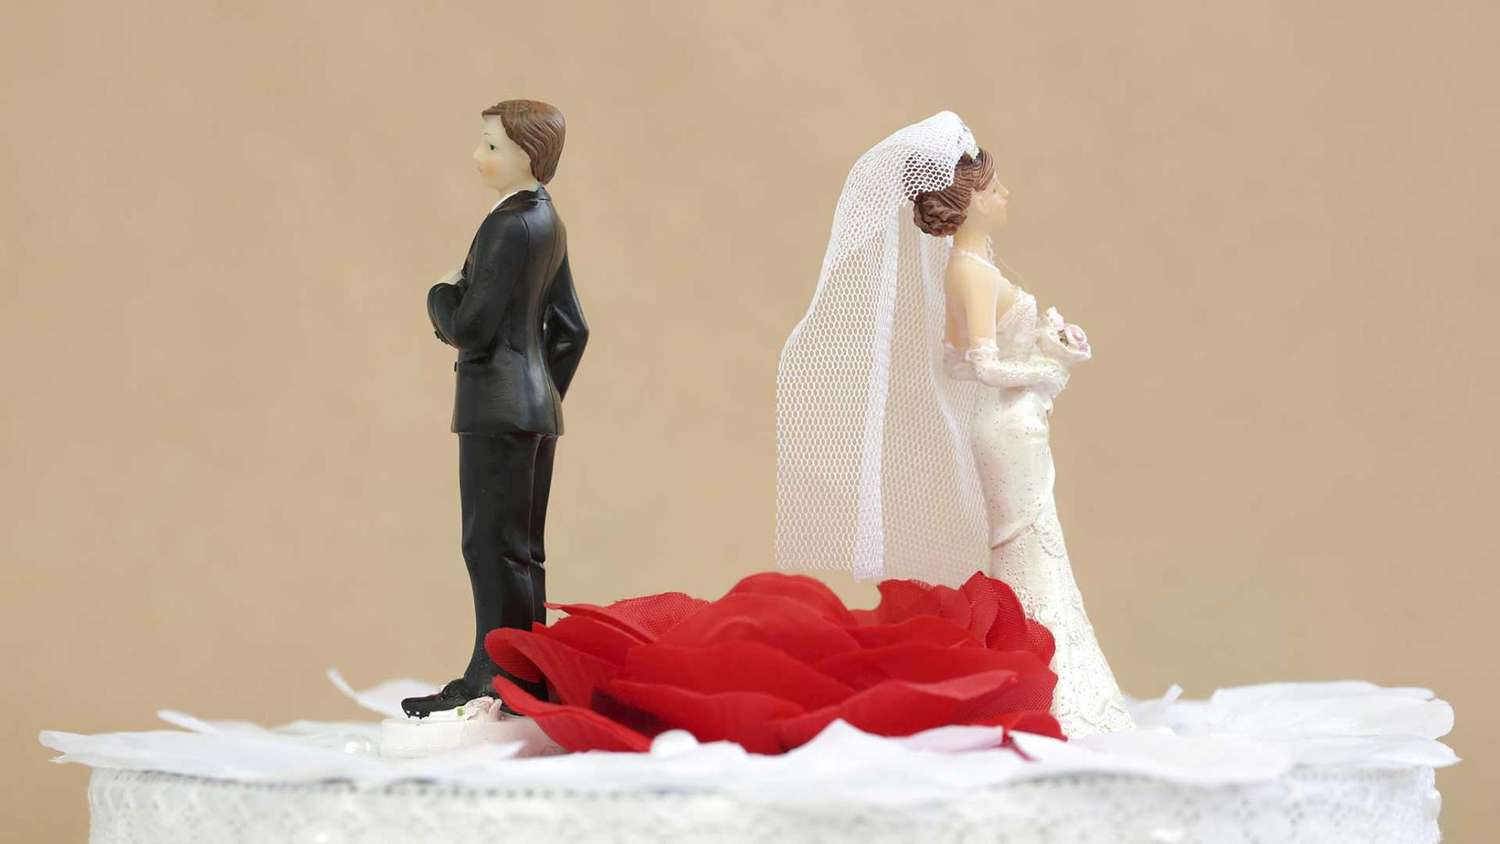 How Fast Can I Get a Divorce in Maryland? - Law Office of Laurie M.  Wasserman